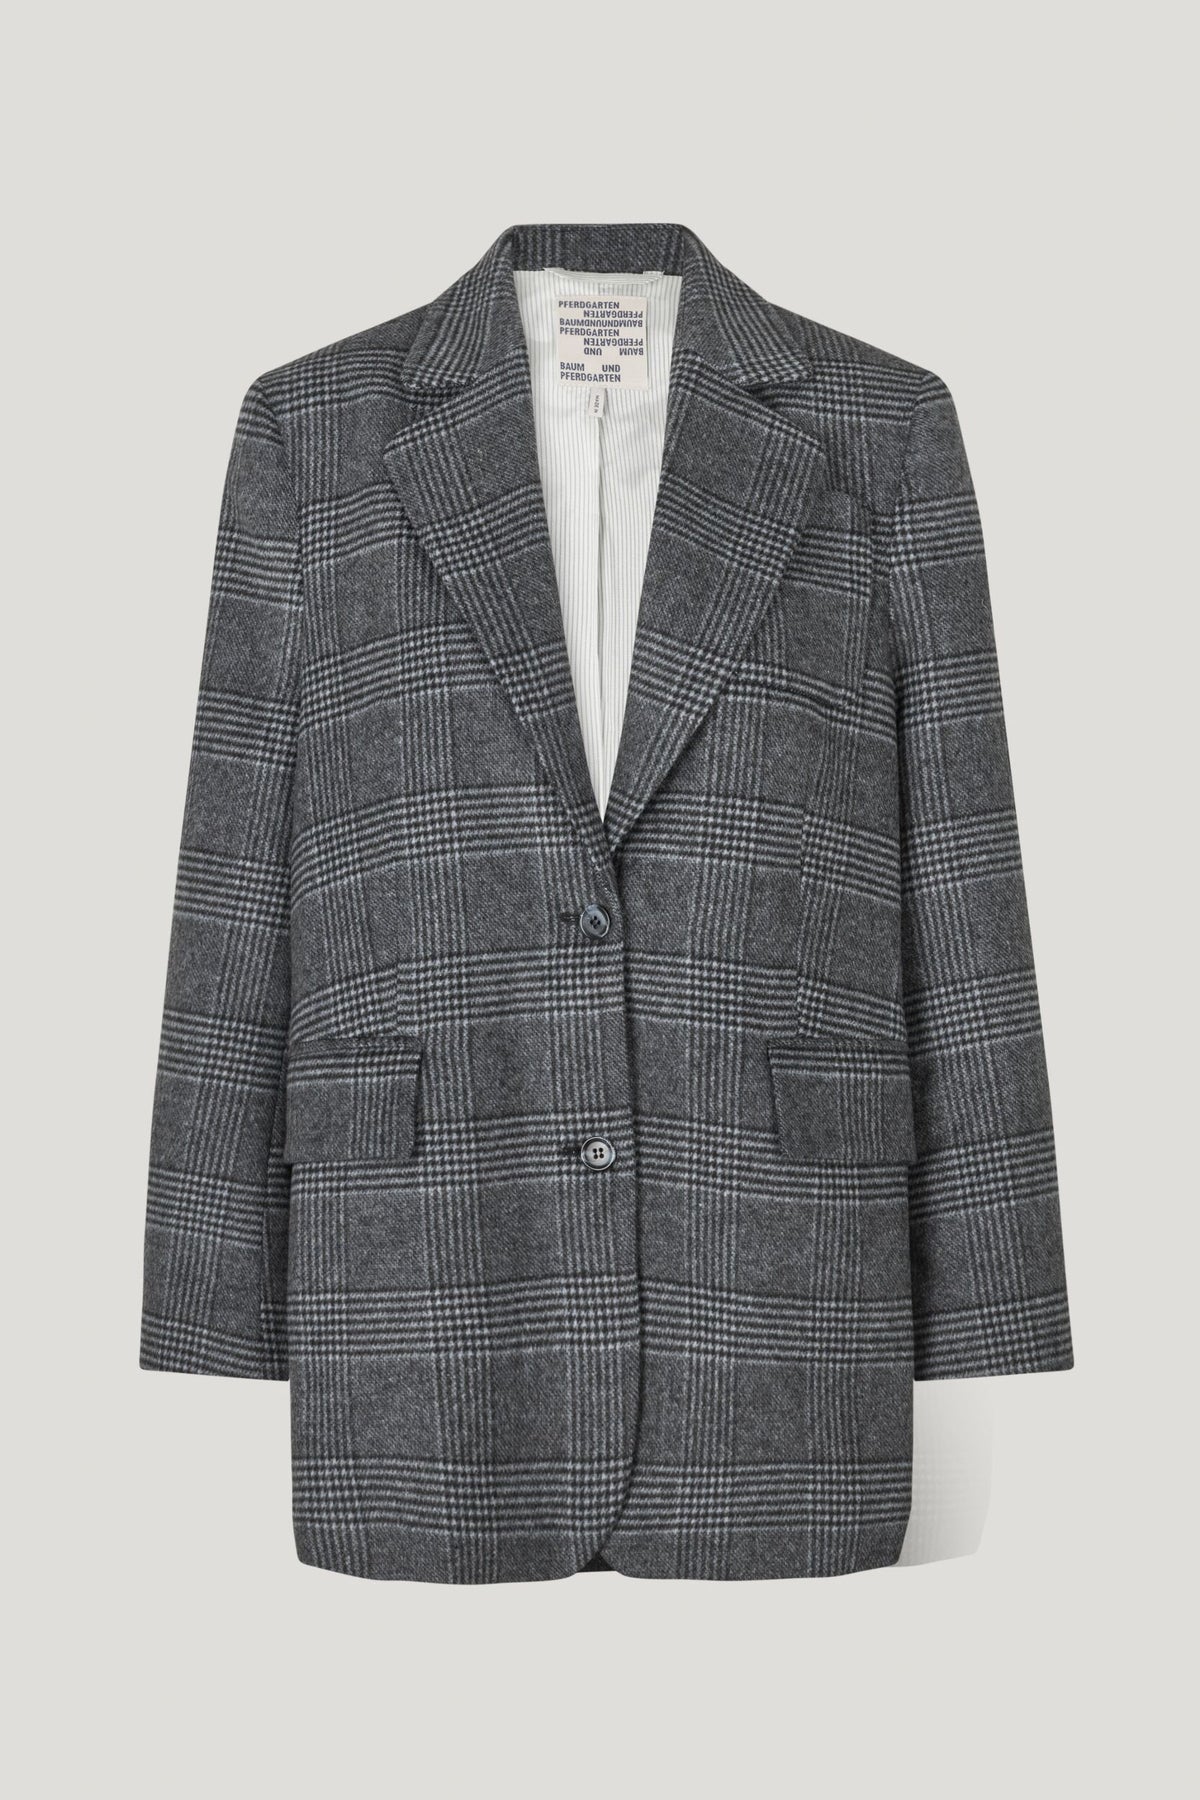 Grey check single breasted blazer with flap pockets and contrasting stripe lining